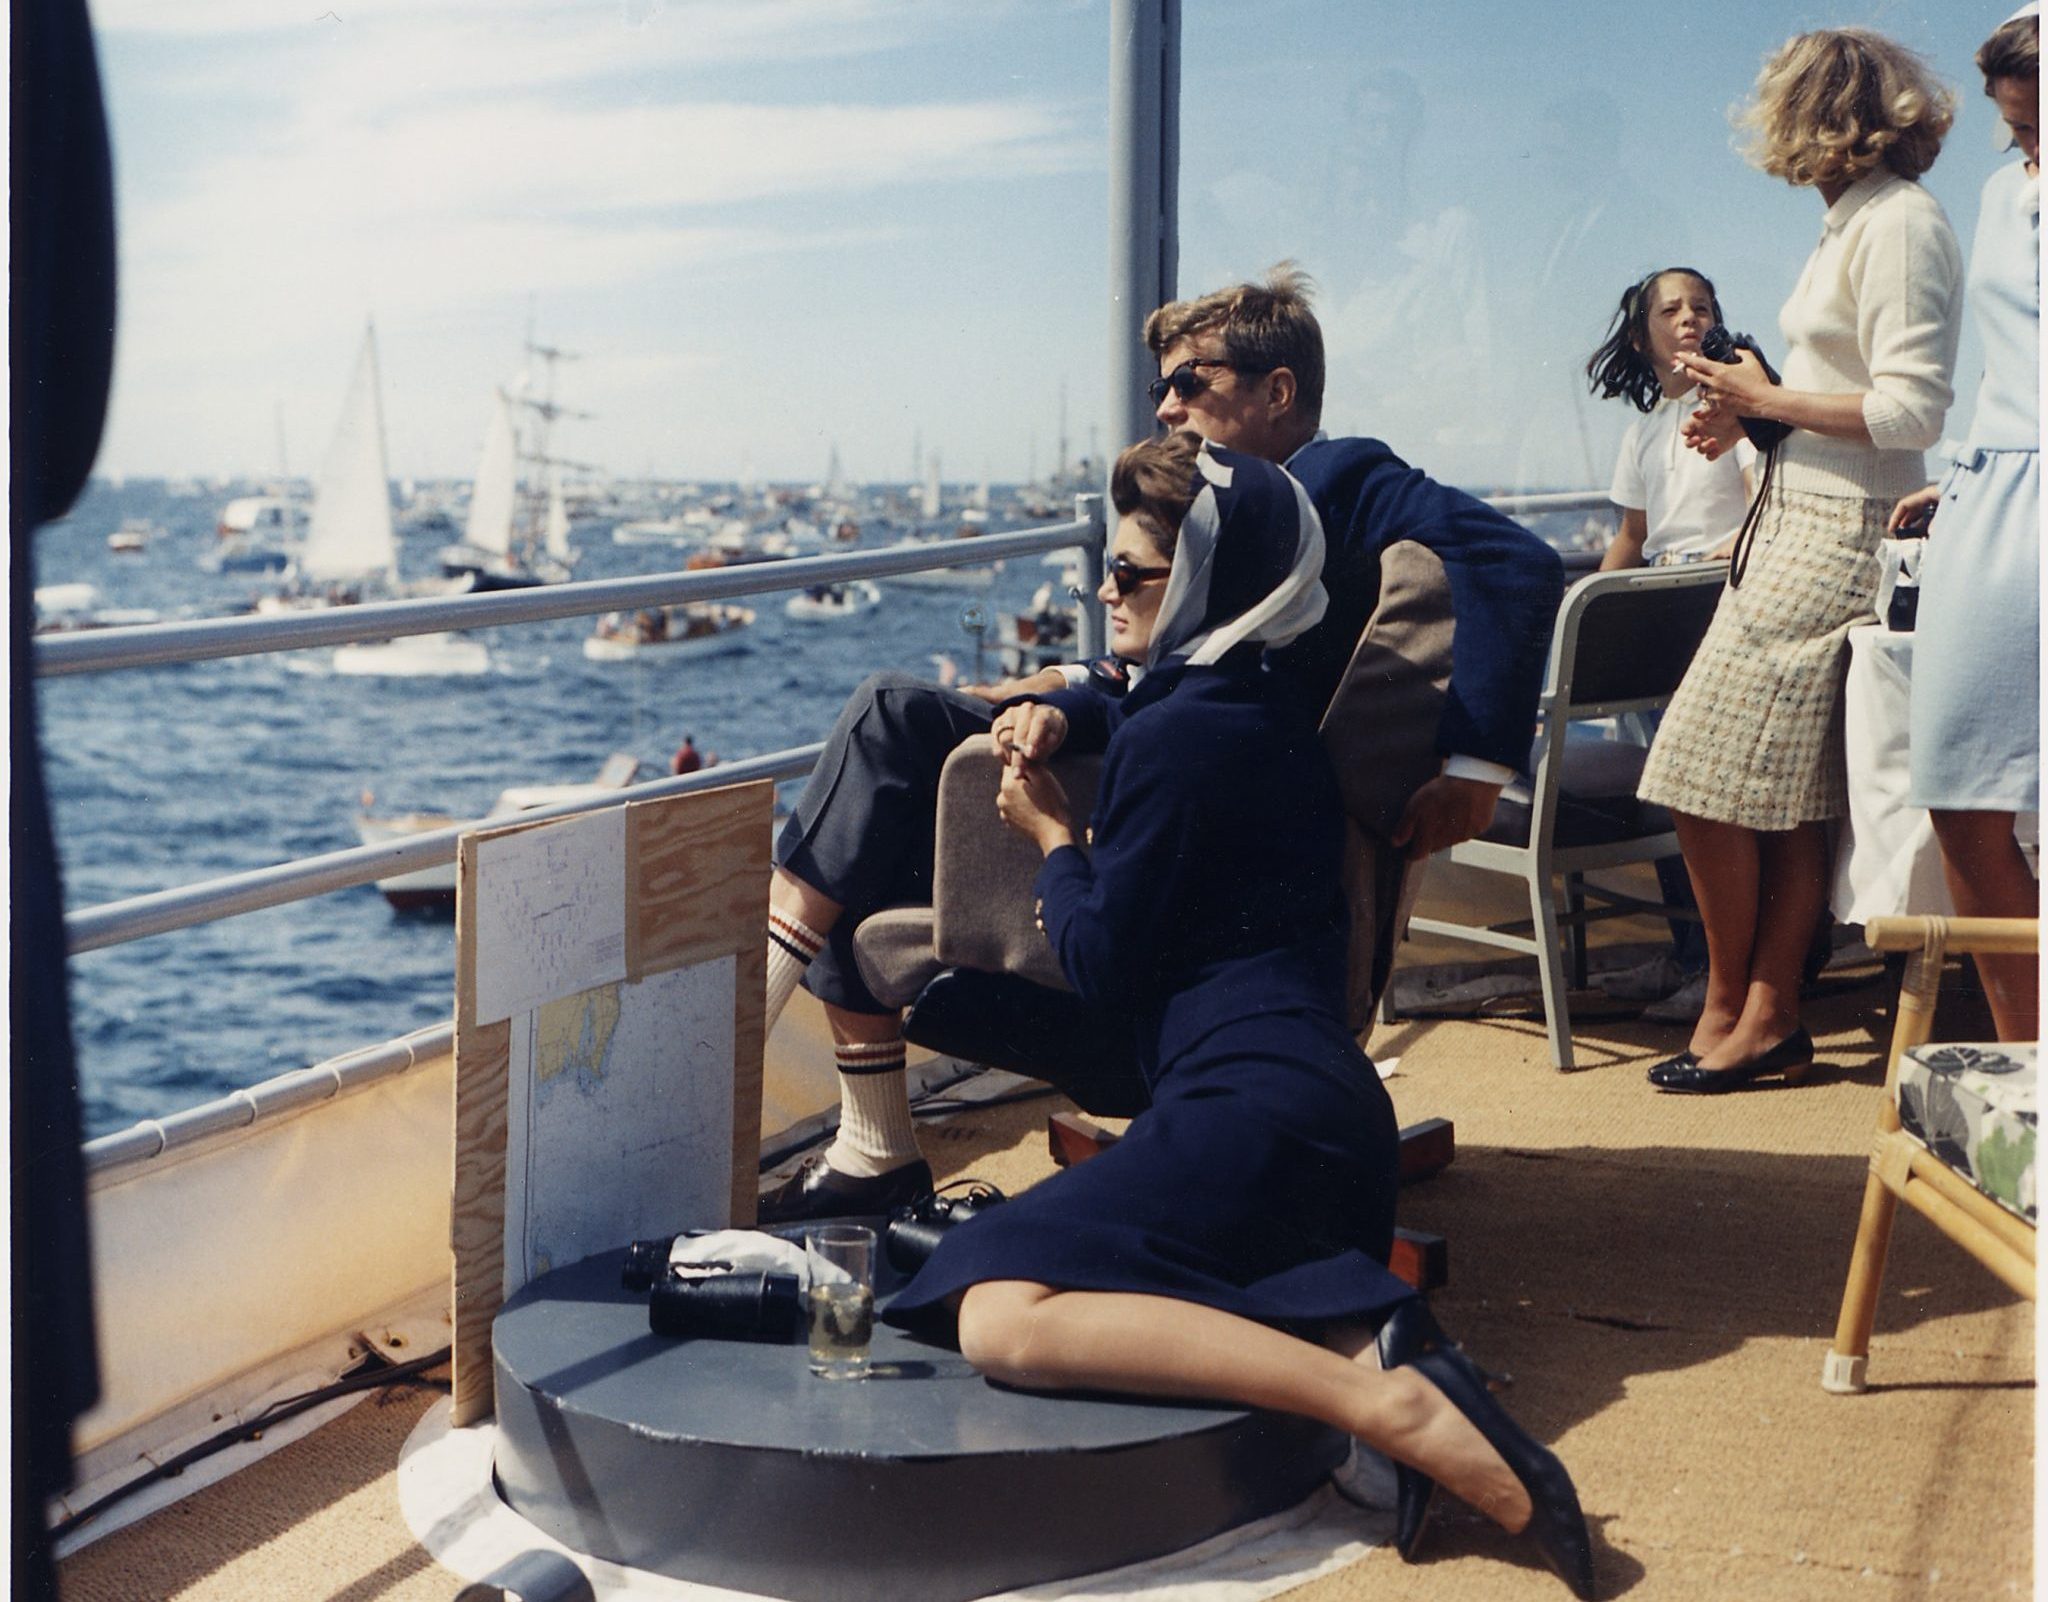 Watching_the_America's_Cup_Race._Mrs._Kennedy,_President_Kennedy,_others._Off_Newport,_RI,_aboard_the_USS_Joseph_P...._-_NARA_-_194214